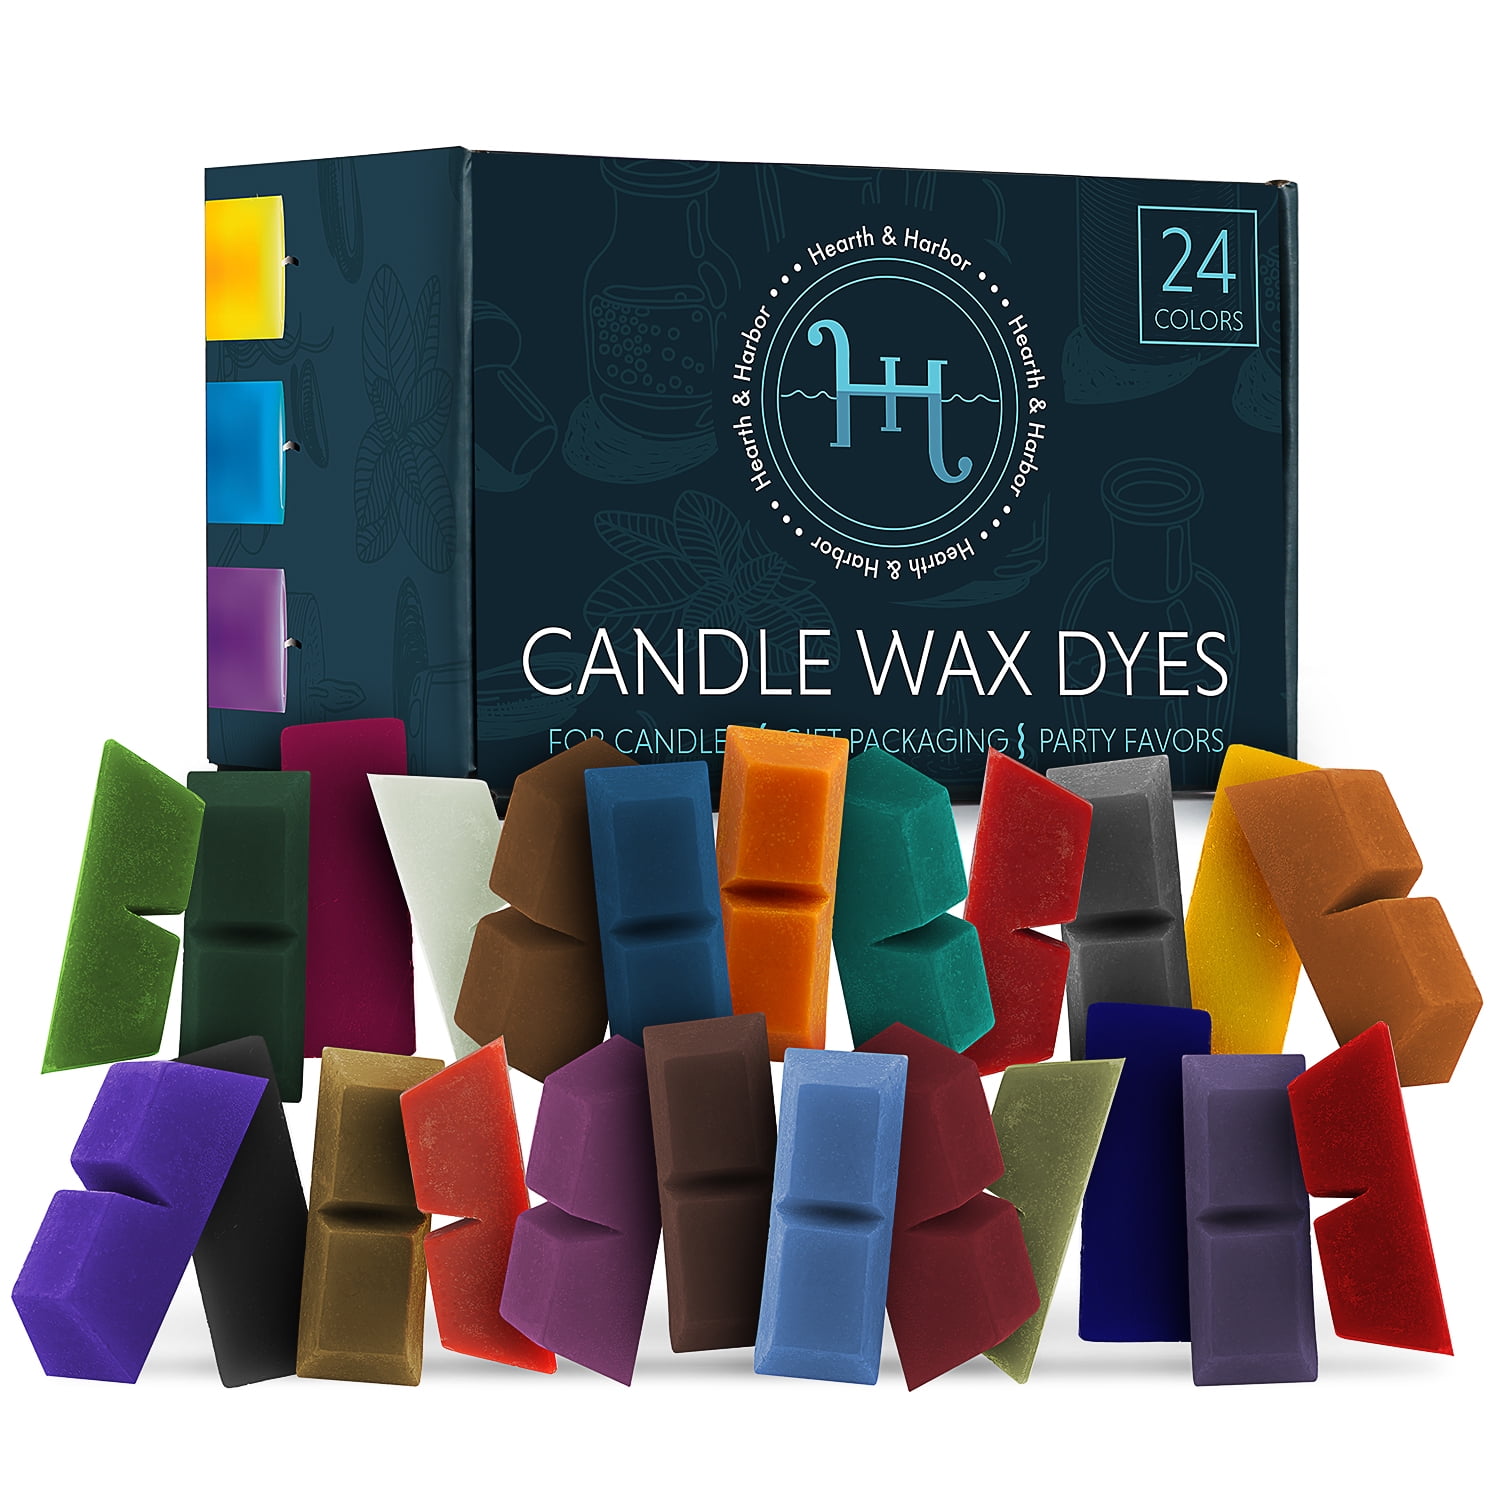 Candle Dye - 21 Colors Wax Melt Dye for Candle Making, Oil-Based Dye for  Wax, Highly Concentrate Liquid Candle Color Dye